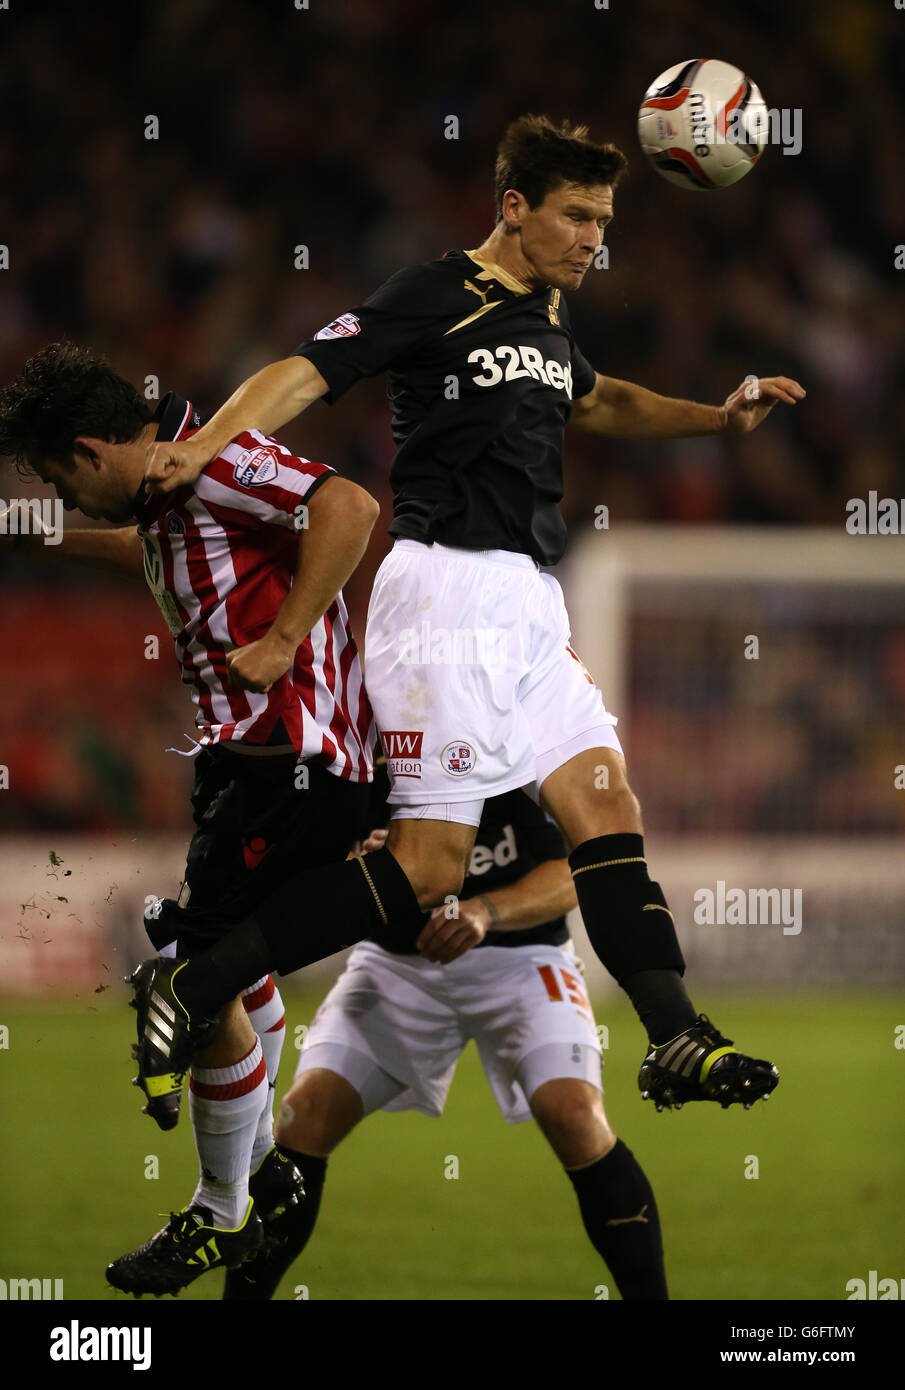 Soccer - Sky Bet League One - Sheffield United v Crawley Town - Bramall Lane. Sheffield United's Simon Lappin (left) and Crawley Town's Josh Simpson battle for the ball Stock Photo